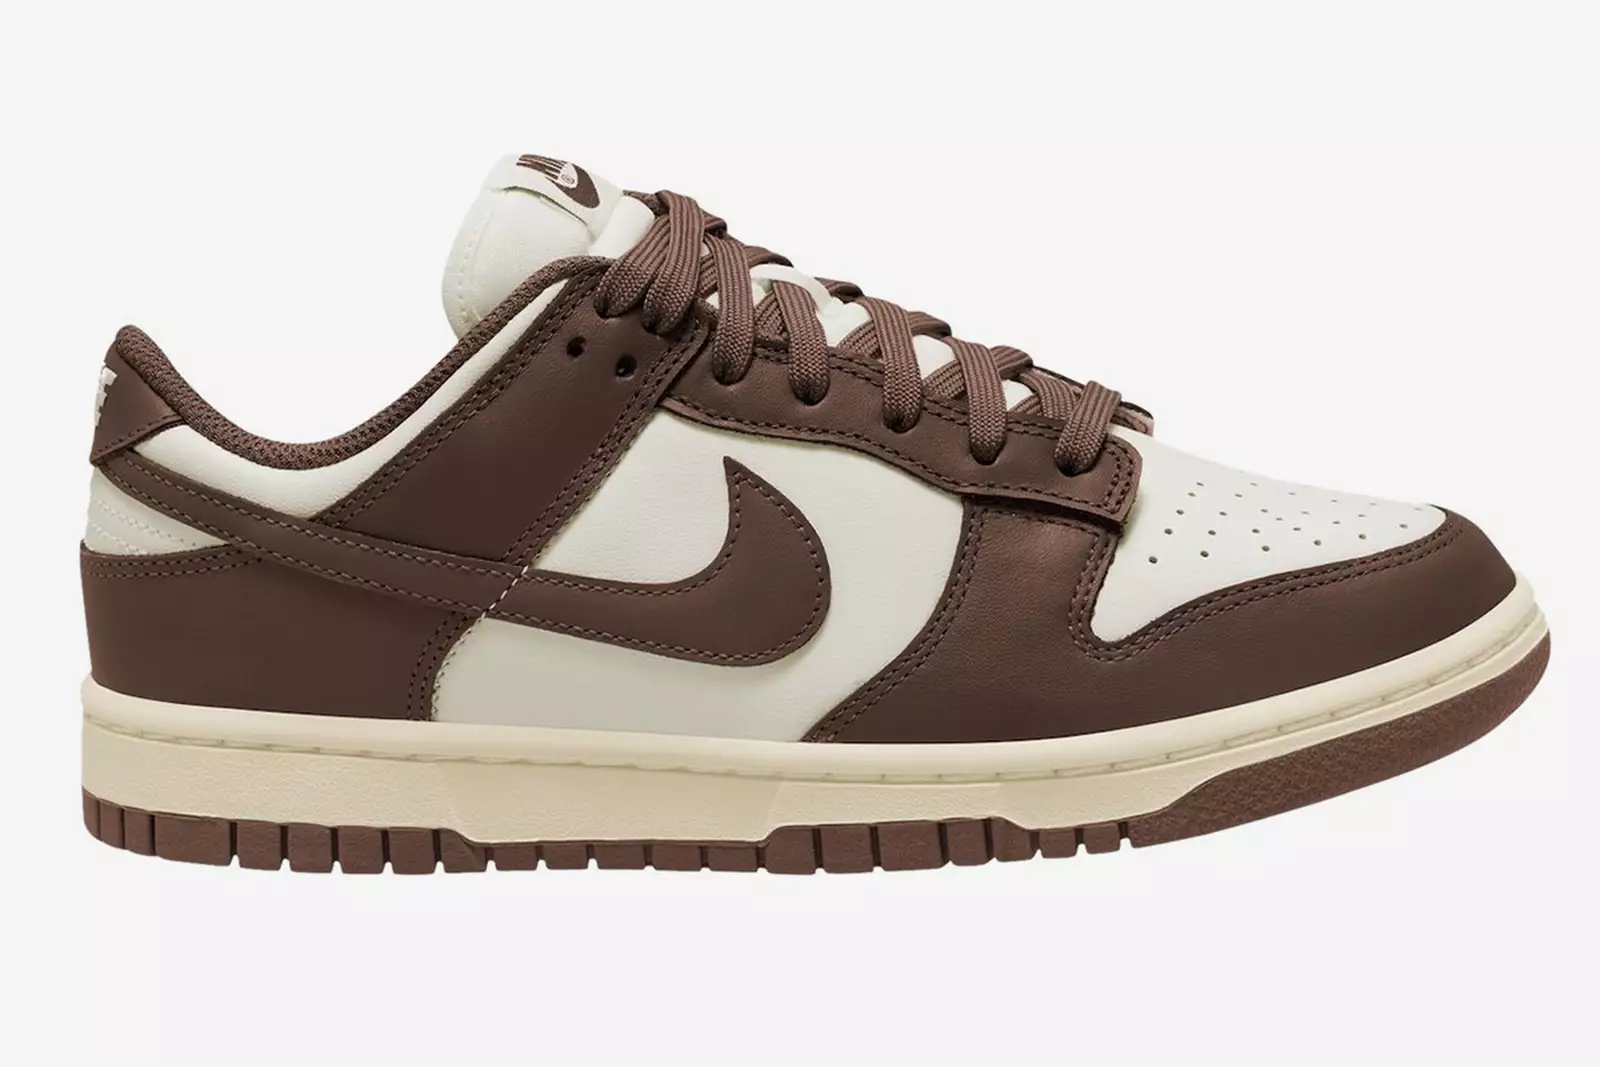 A first Look at The New Brown Nike Dunk Low "Mocha"